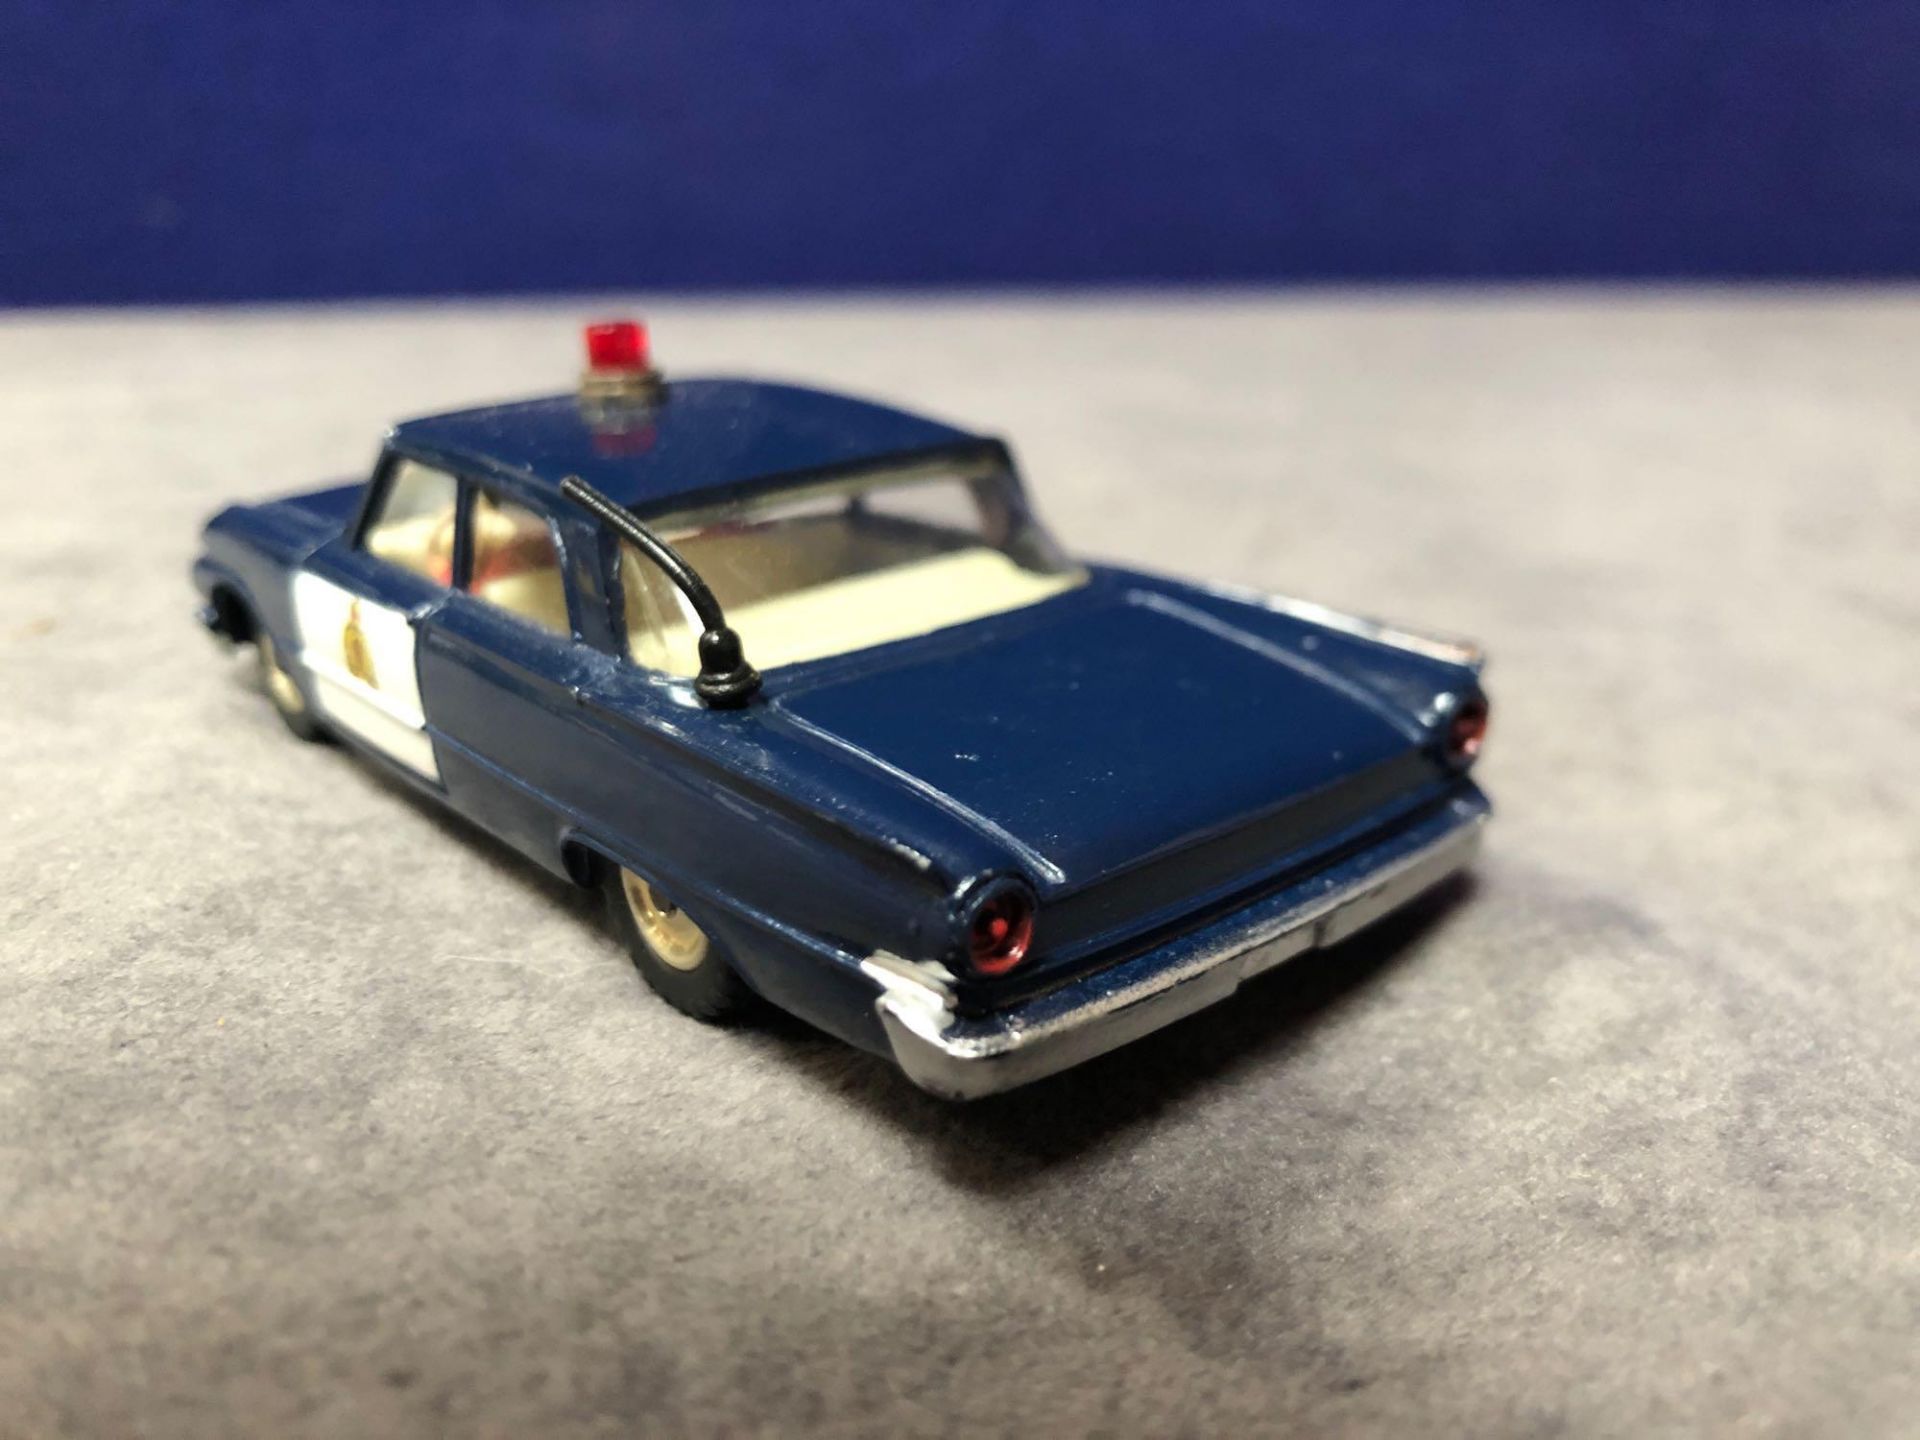 Dinky #264 Ford Fairlane Patrol Car Unboxed Superb Mint Model Deserving Of A Box 1962-1968 - Image 3 of 4